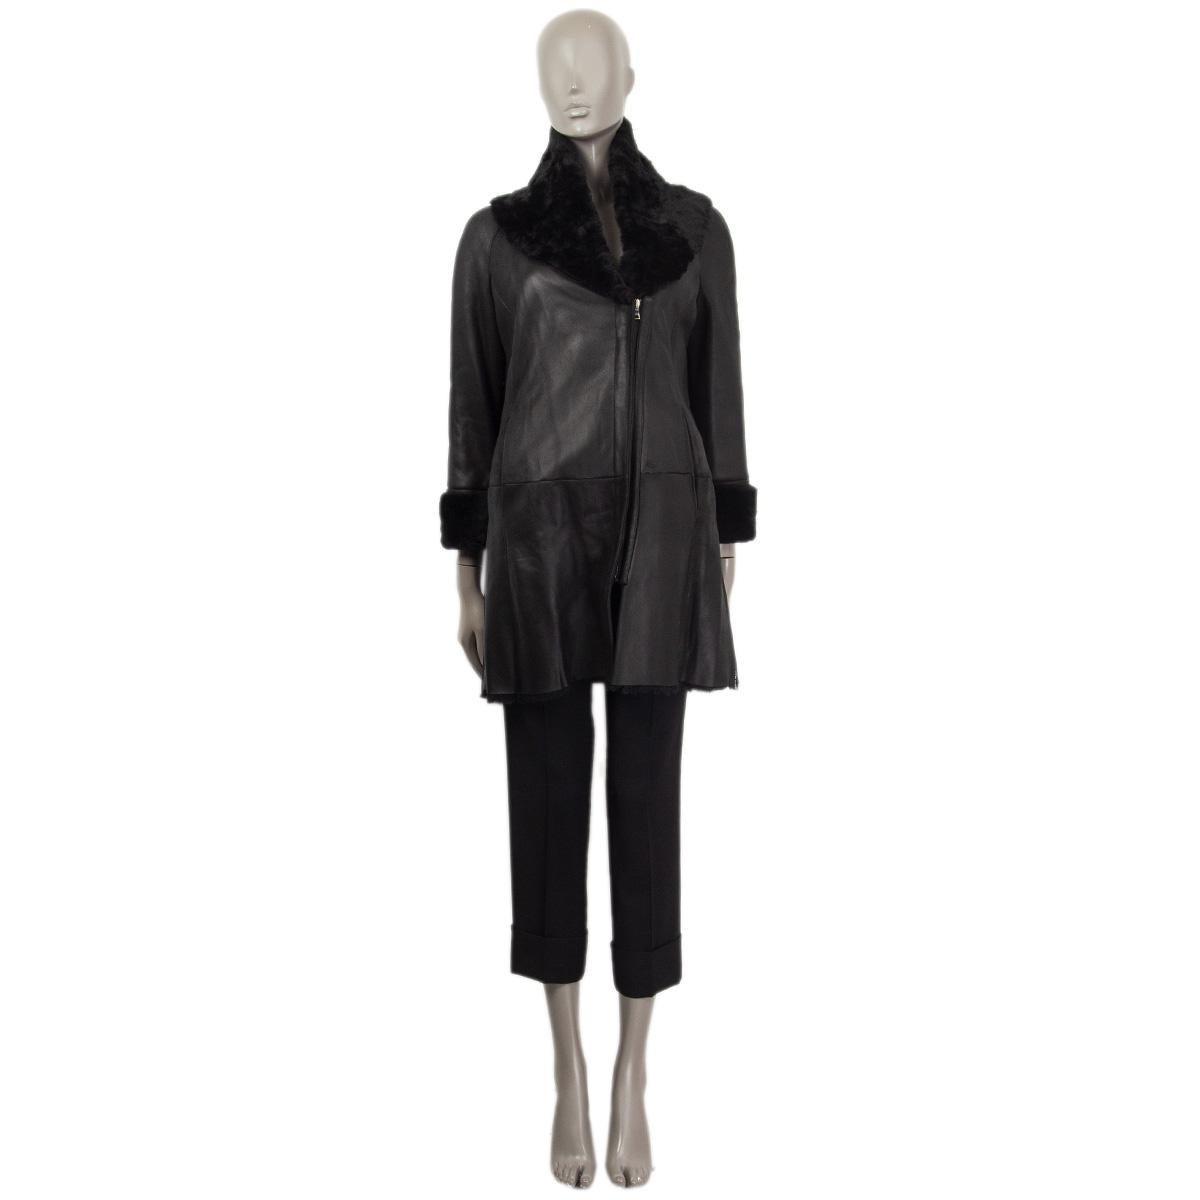 100% authentic Jil Sander NAVY shearling coat in black lambskin featuring a large shawl collar. Opens with a asymmetrical zipper at front and is lined in black lamb-fur. Has two side-zippers and two slit pockets at front. Has been worn and is in